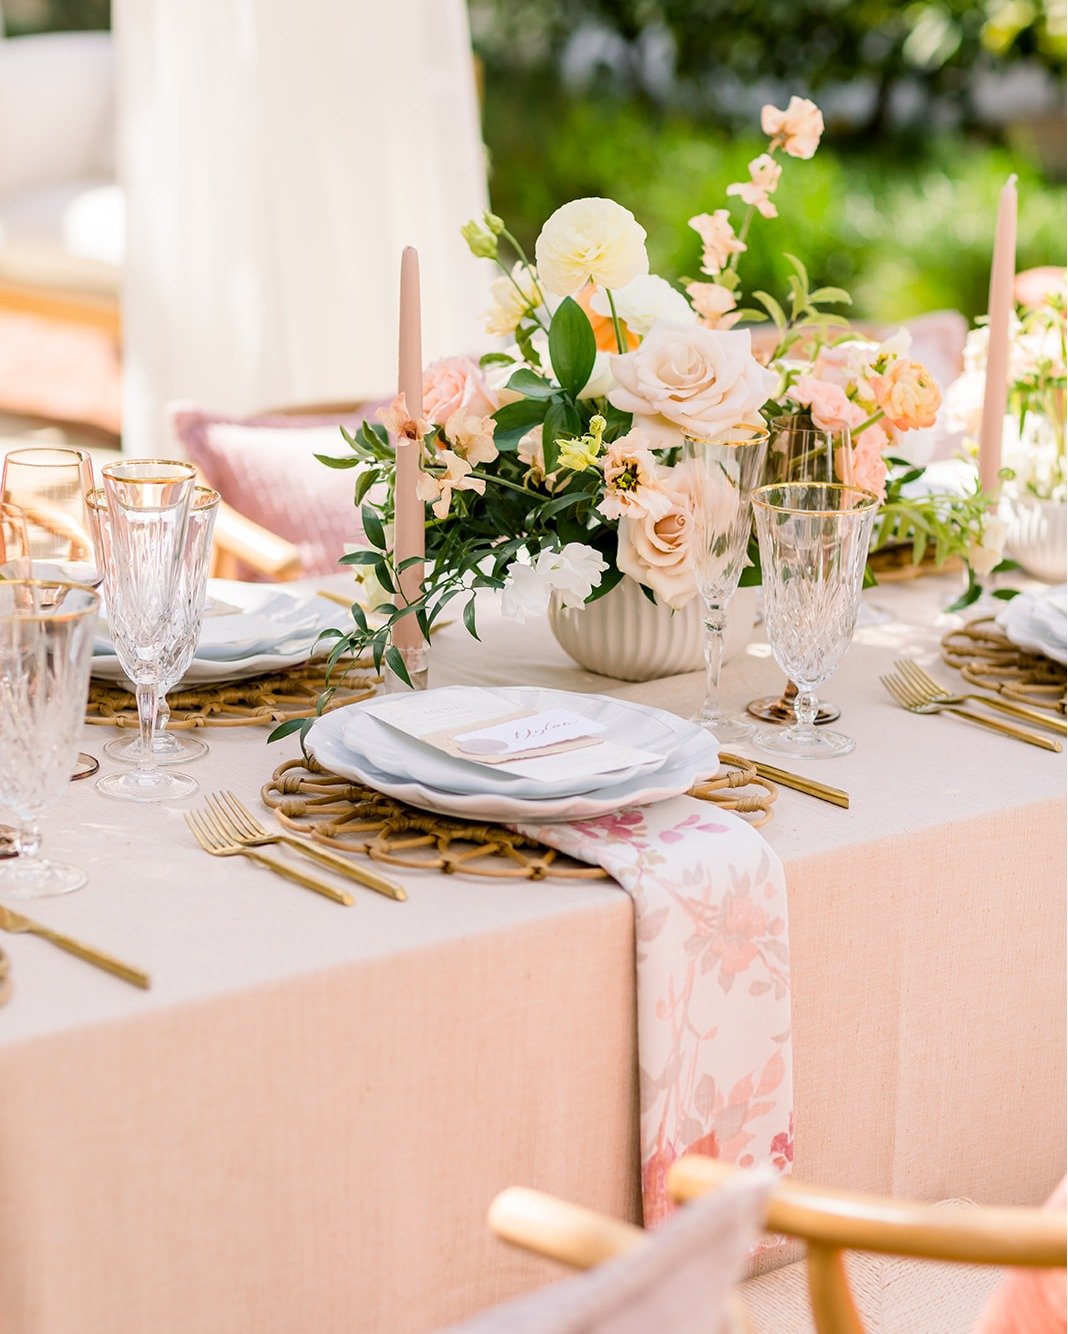 Meet our passionate CCWP Member, @heydayweddings !

This beautiful styled shoot is a testament to Heyday's eye for style and design. With photography by the talented @slotownstudios at the incredible @biddleranchvineyard , this shoot brings beautiful